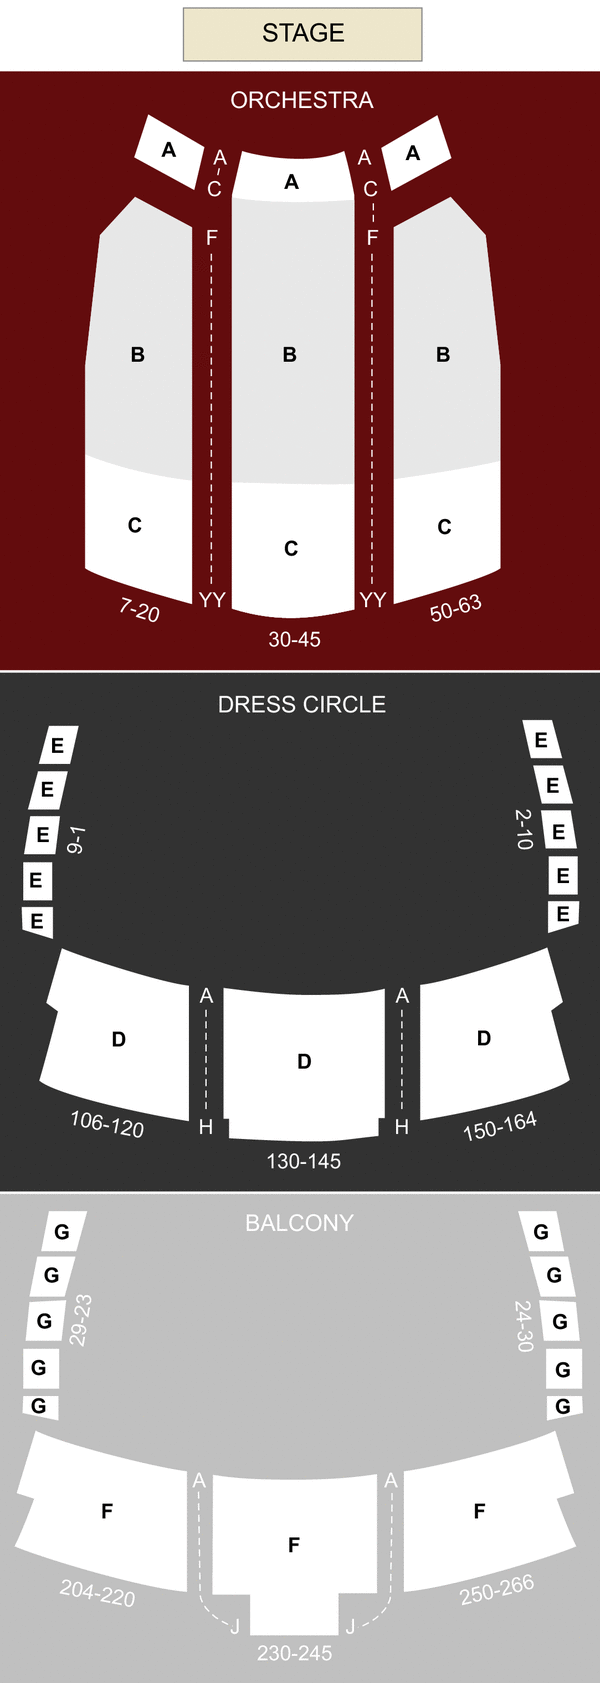 Centre In Vancouver For Performing Arts Seating Chart